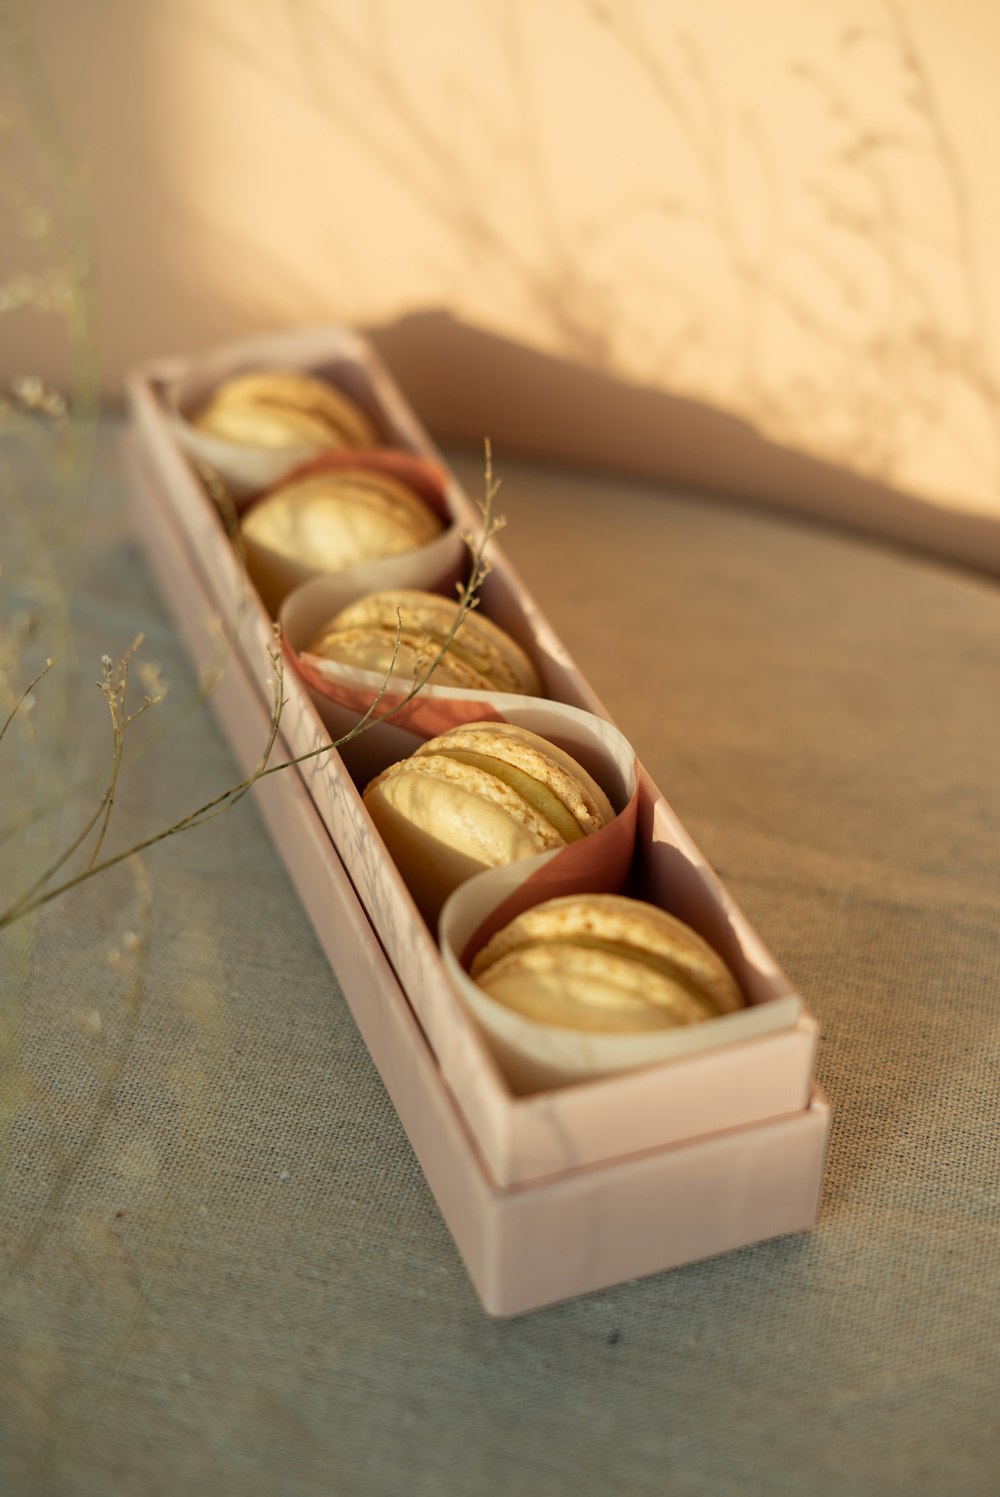 brown and white round pastries in white box